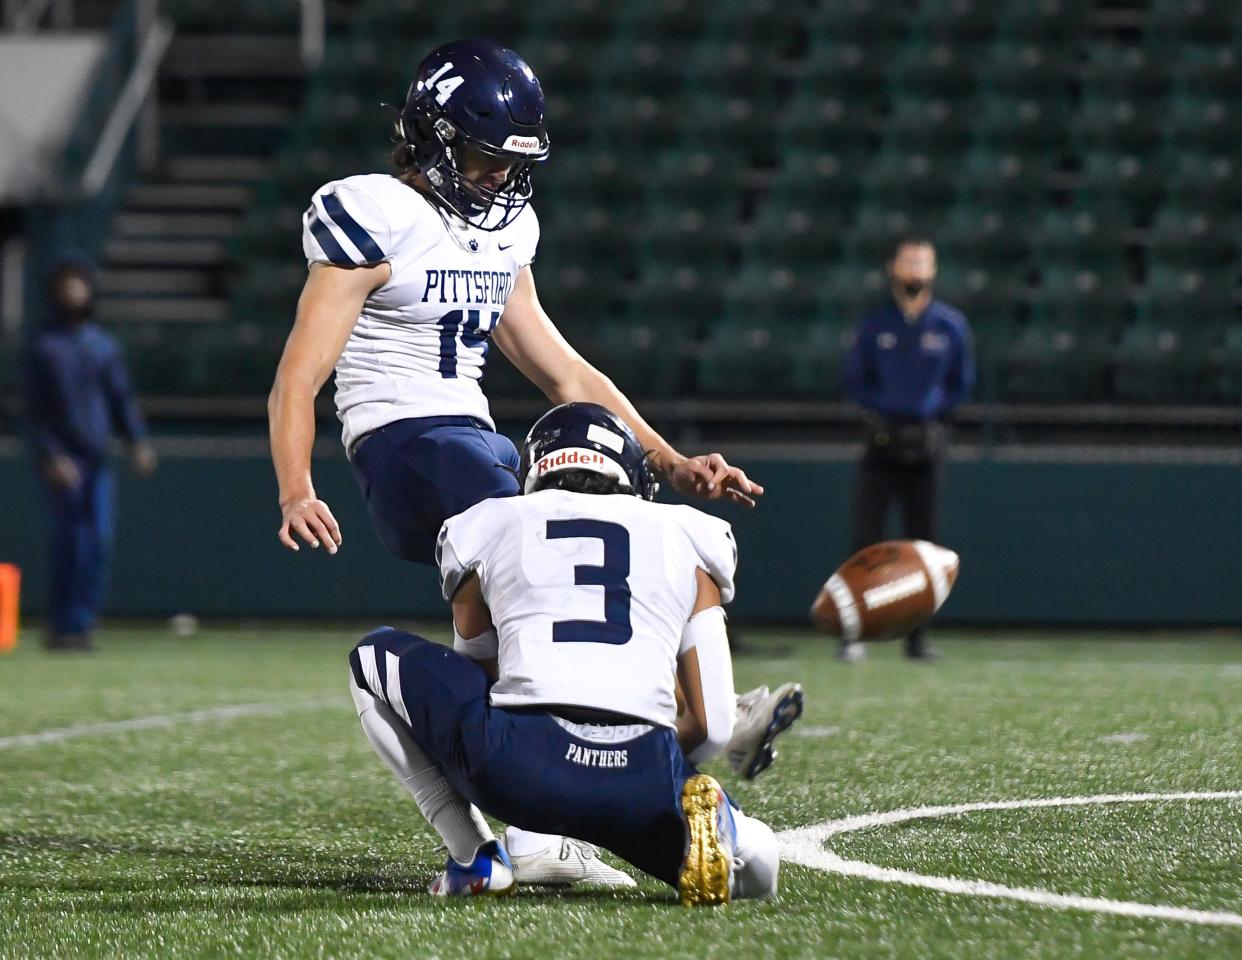 Pittsford's Philip Noyes kicks a field goal from holder Samuel Renica during a Section V Class AA football semifinal, Friday, Nov. 4, 2022. No. 4 seed Pittsford advanced to the Class AA final with a 6-0 win over No. 1 seed University Prep.